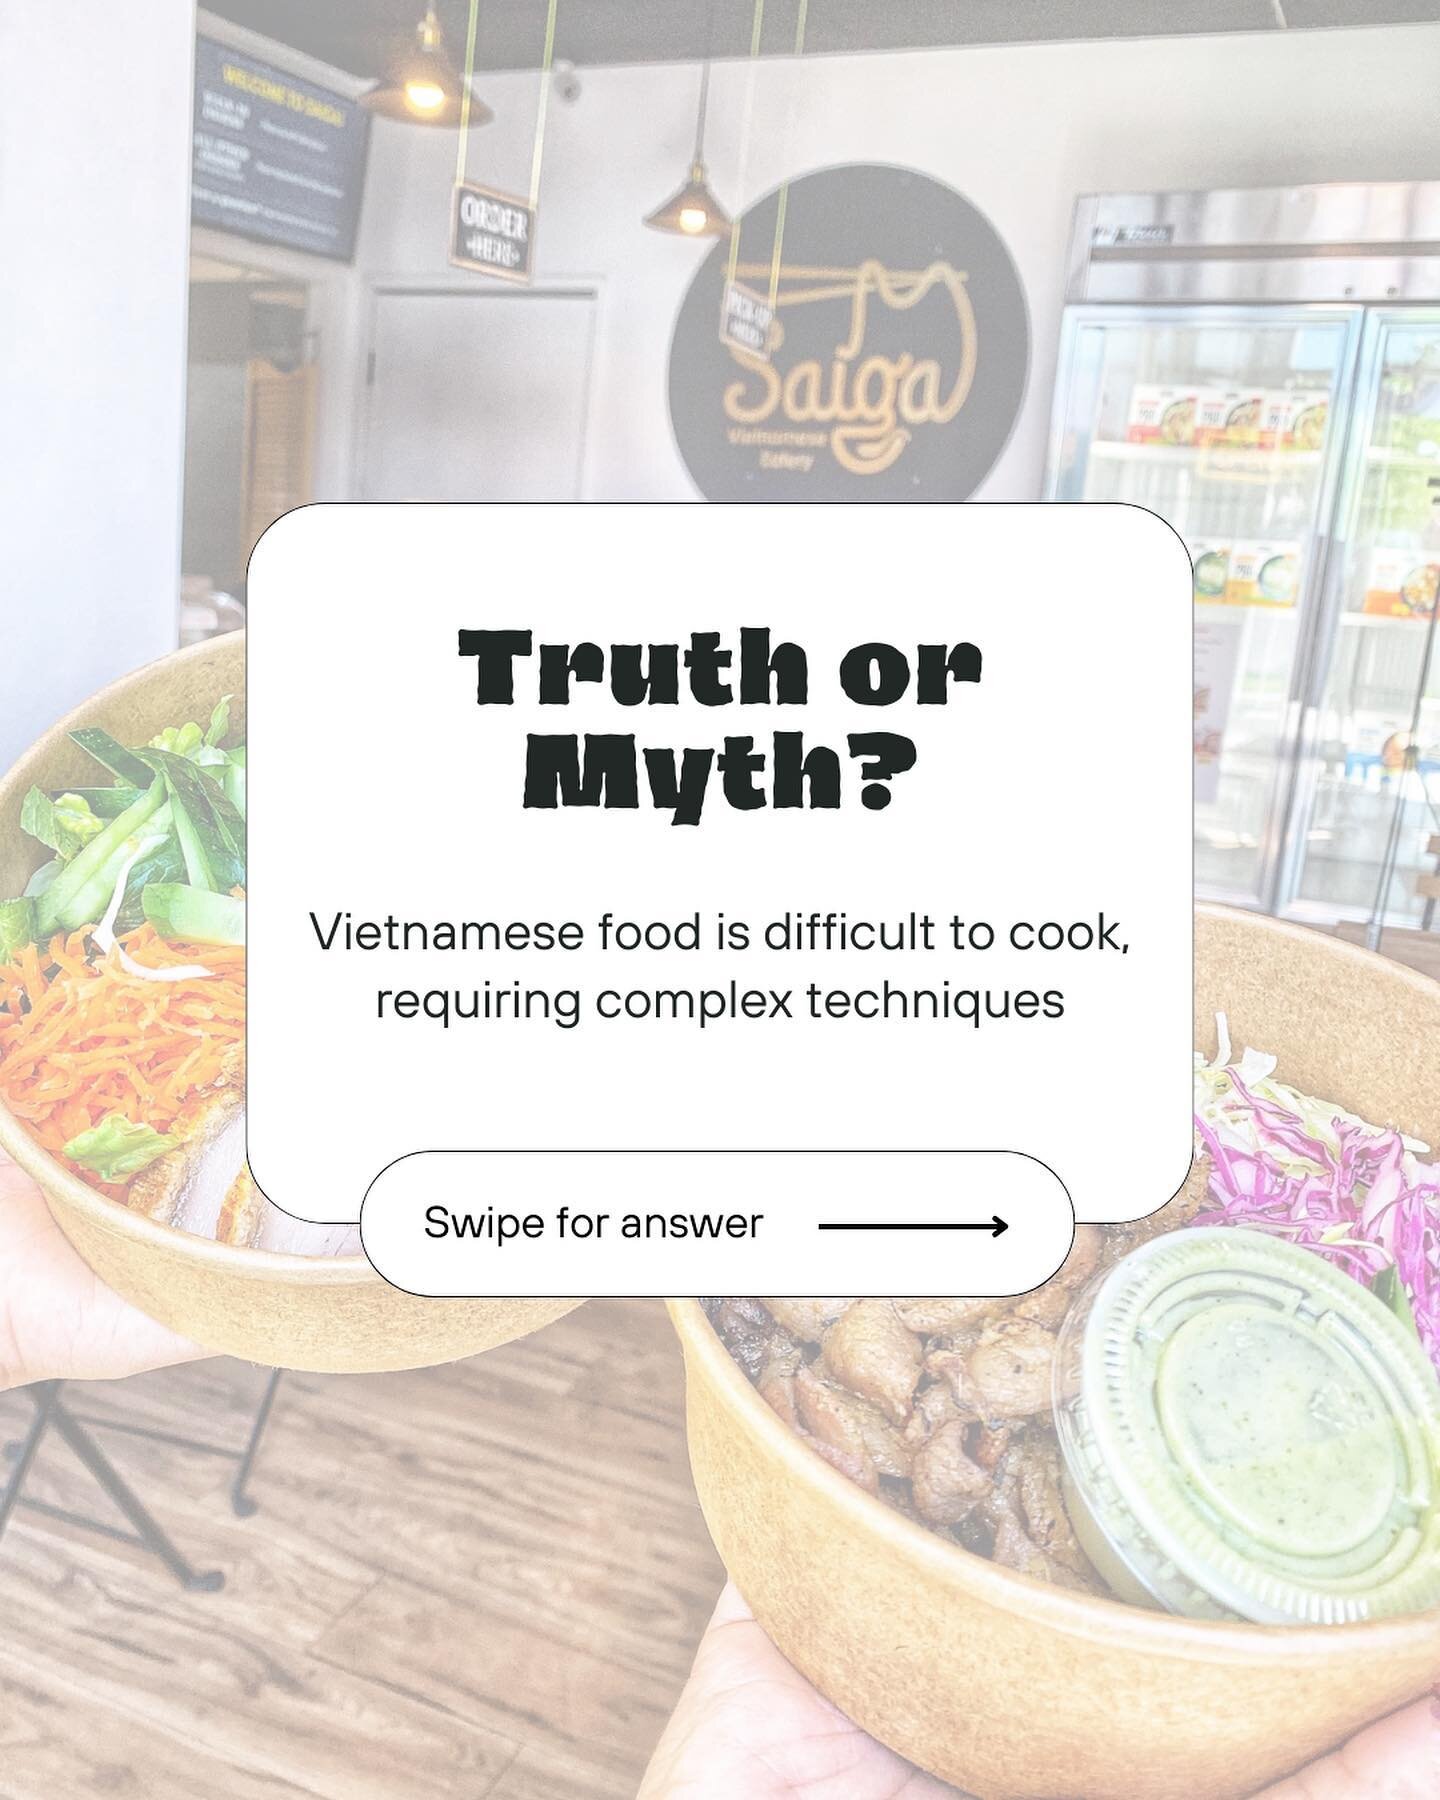 Truth or Myth 🤔

We are all for ditching the intimidation and let your inner chef shine!

... But if you're short on time and still want to experience all of the real authentic flavors, our crazy convenient frozen meals are for you 🫵🏼

🍜 Saiga 
?